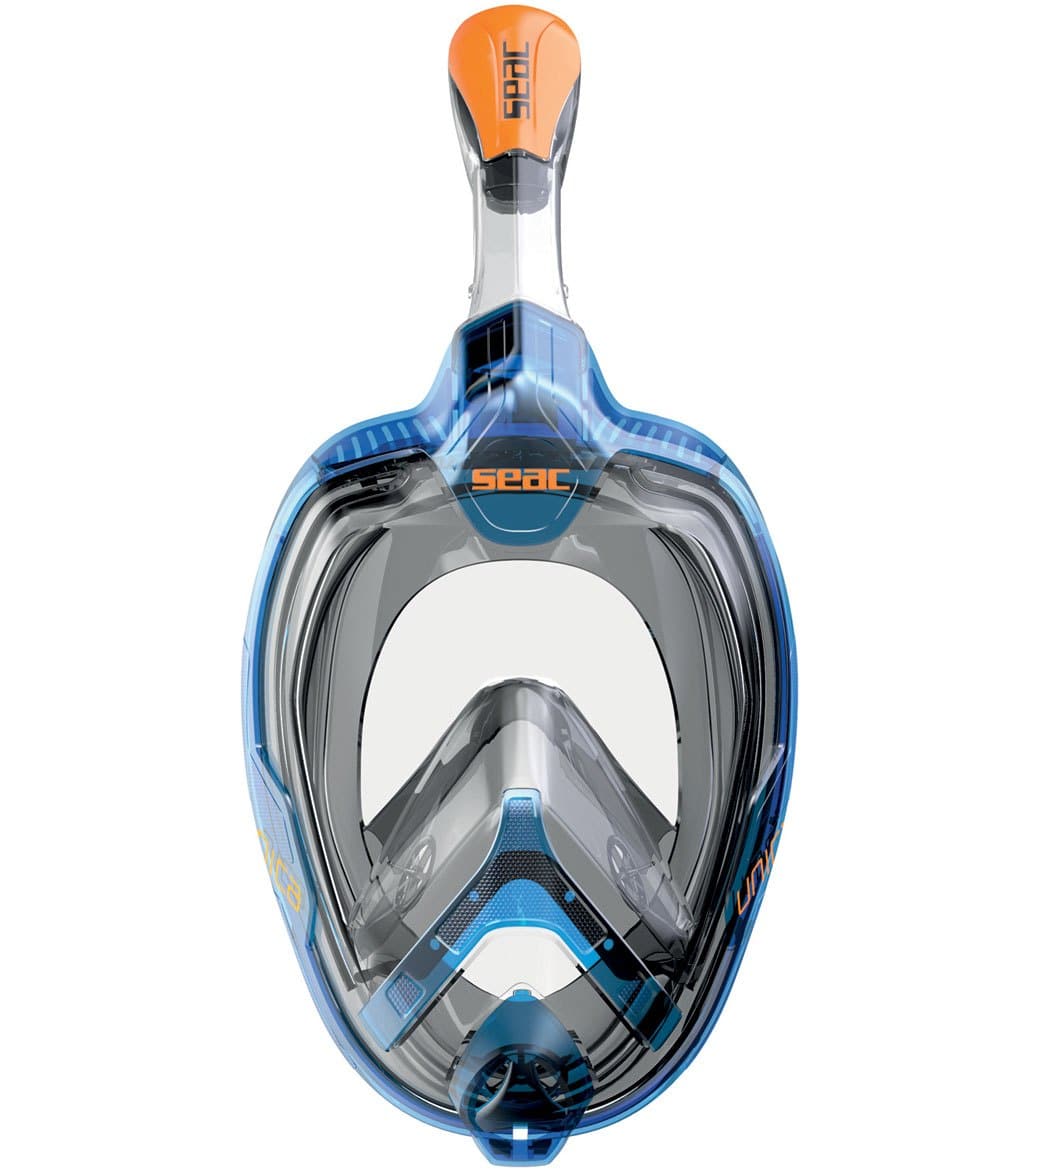 Seac USA Magica Full Face Snorkeling Mask at SwimOutlet.com